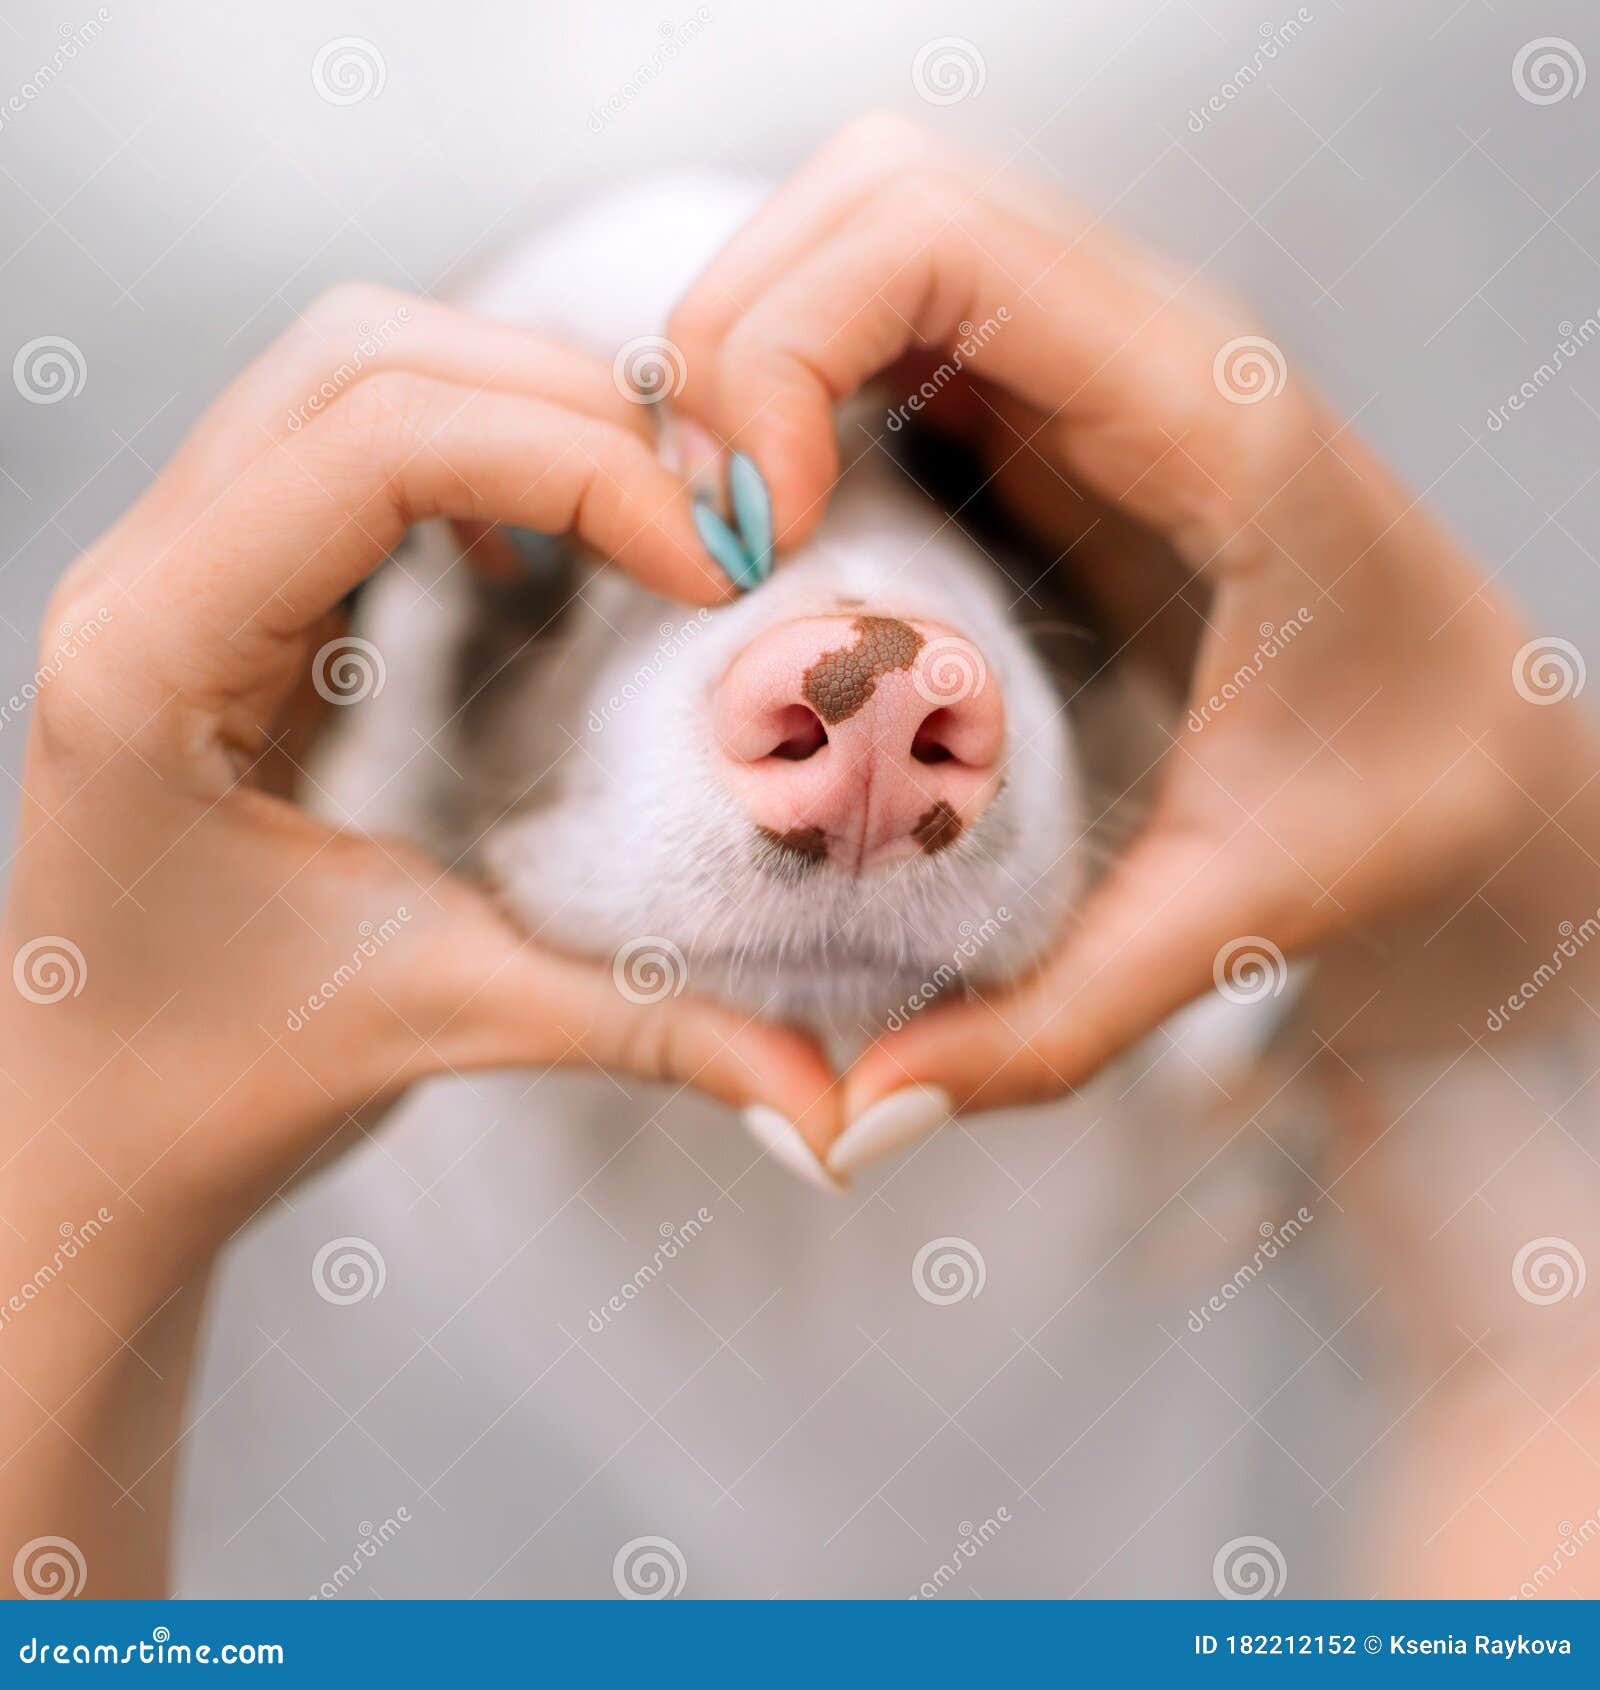 dog nose close up with owner hands in a heart  around it